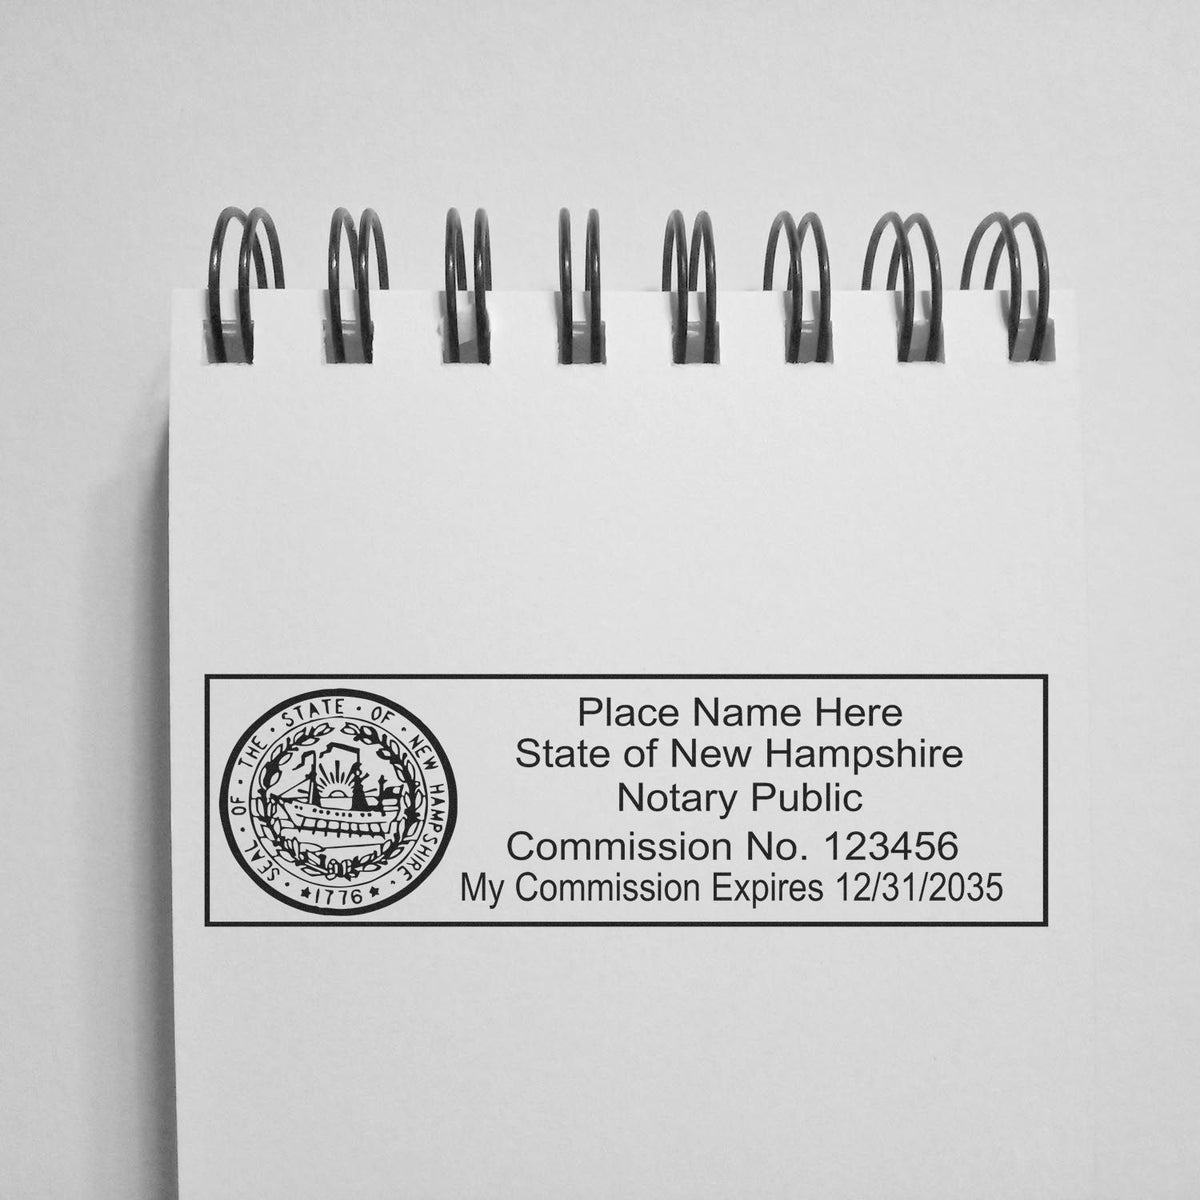 Another Example of a stamped impression of the Heavy-Duty New Hampshire Rectangular Notary Stamp on a piece of office paper.